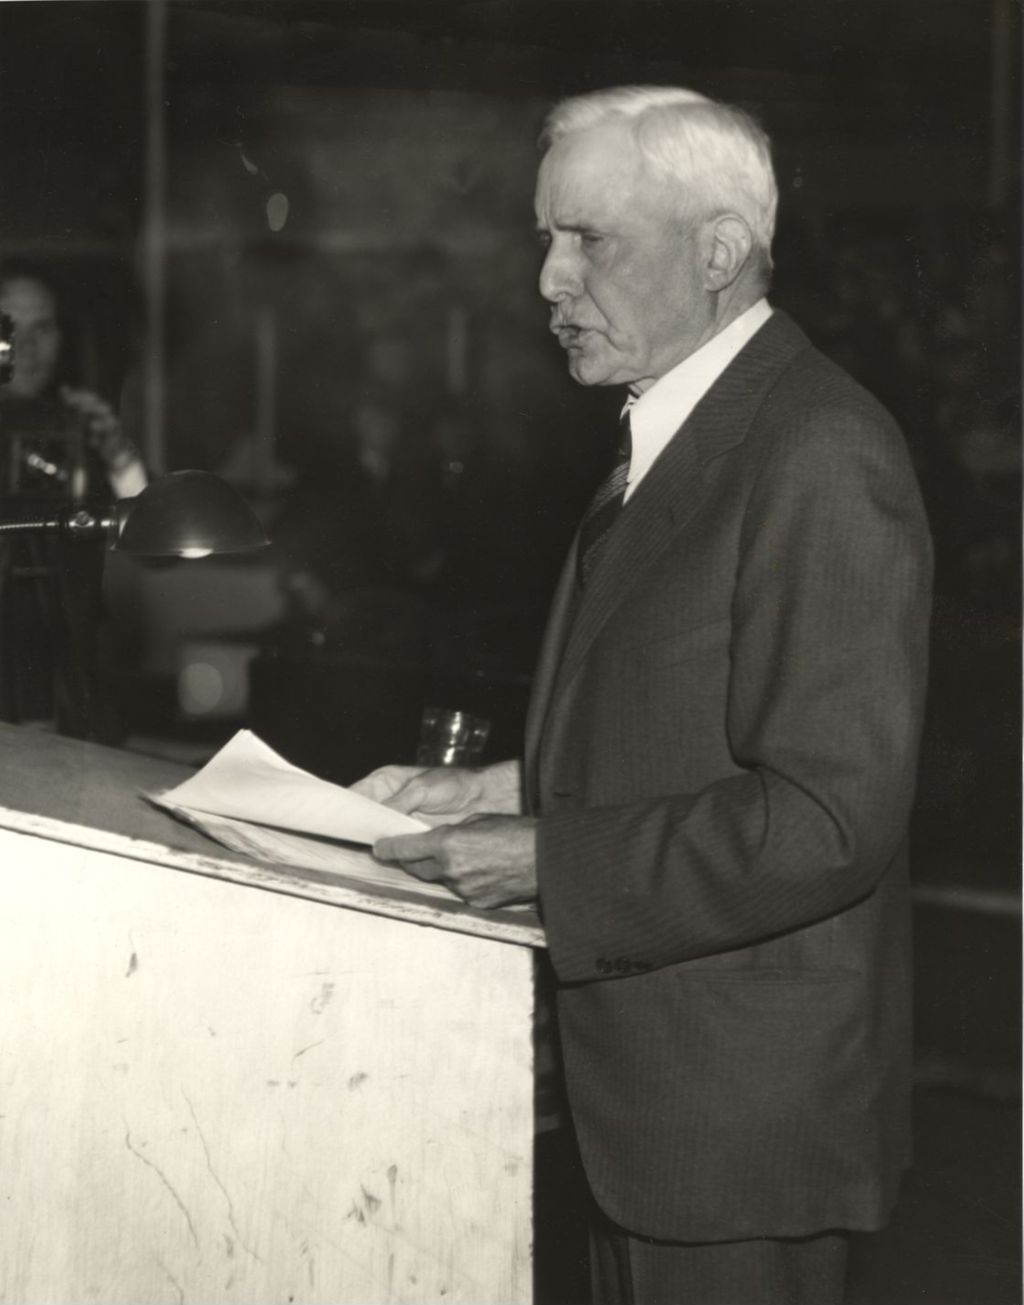 Miniature of James Reed, former U.S. Senator from Missouri, giving a speech at the Century of Progress Court of States.